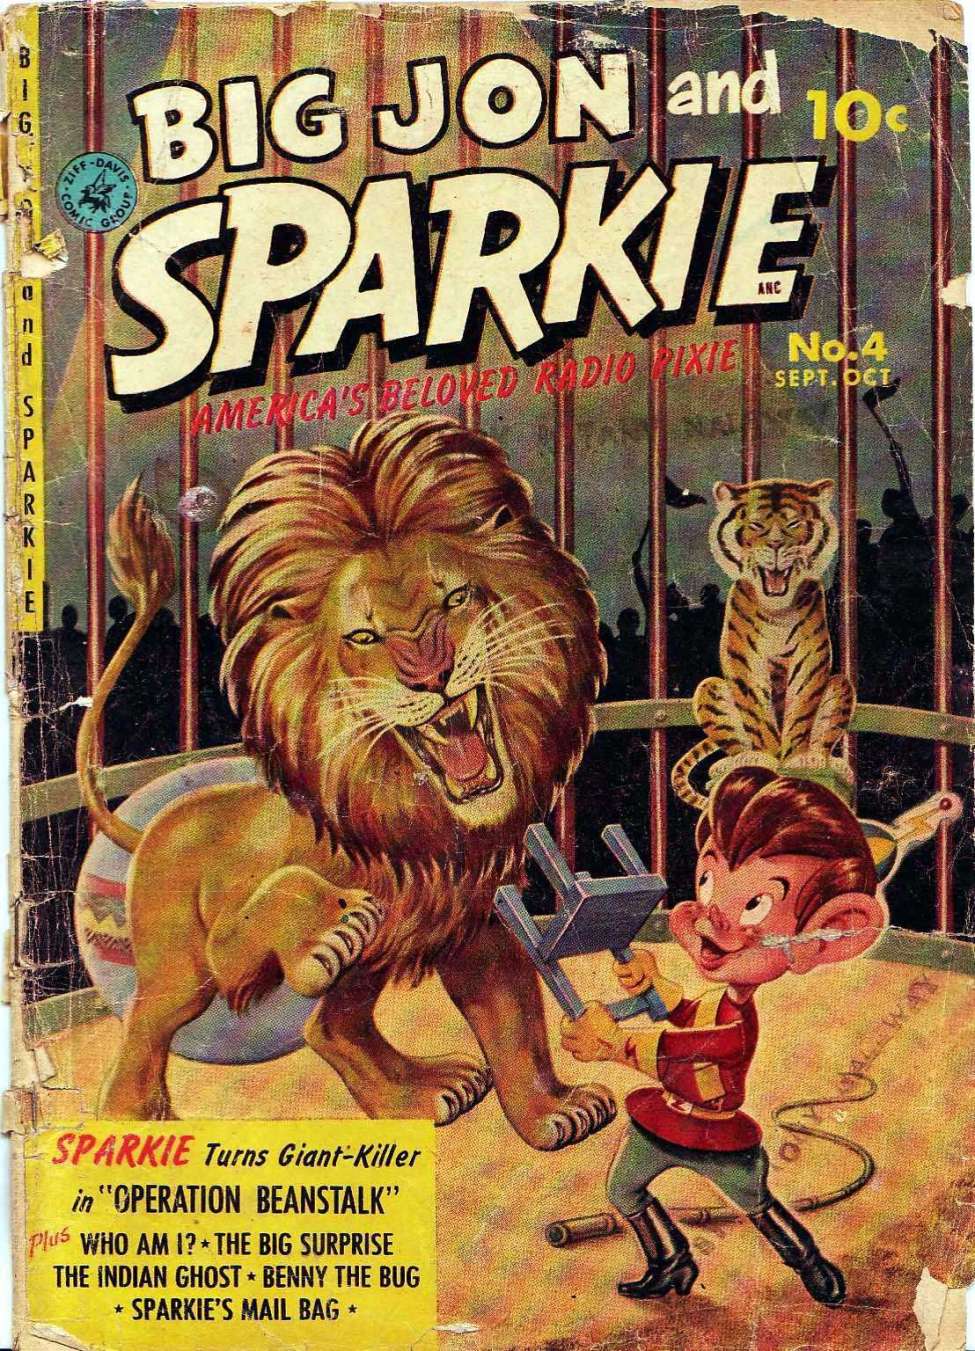 Comic Book Cover For Big Jon and Sparkie